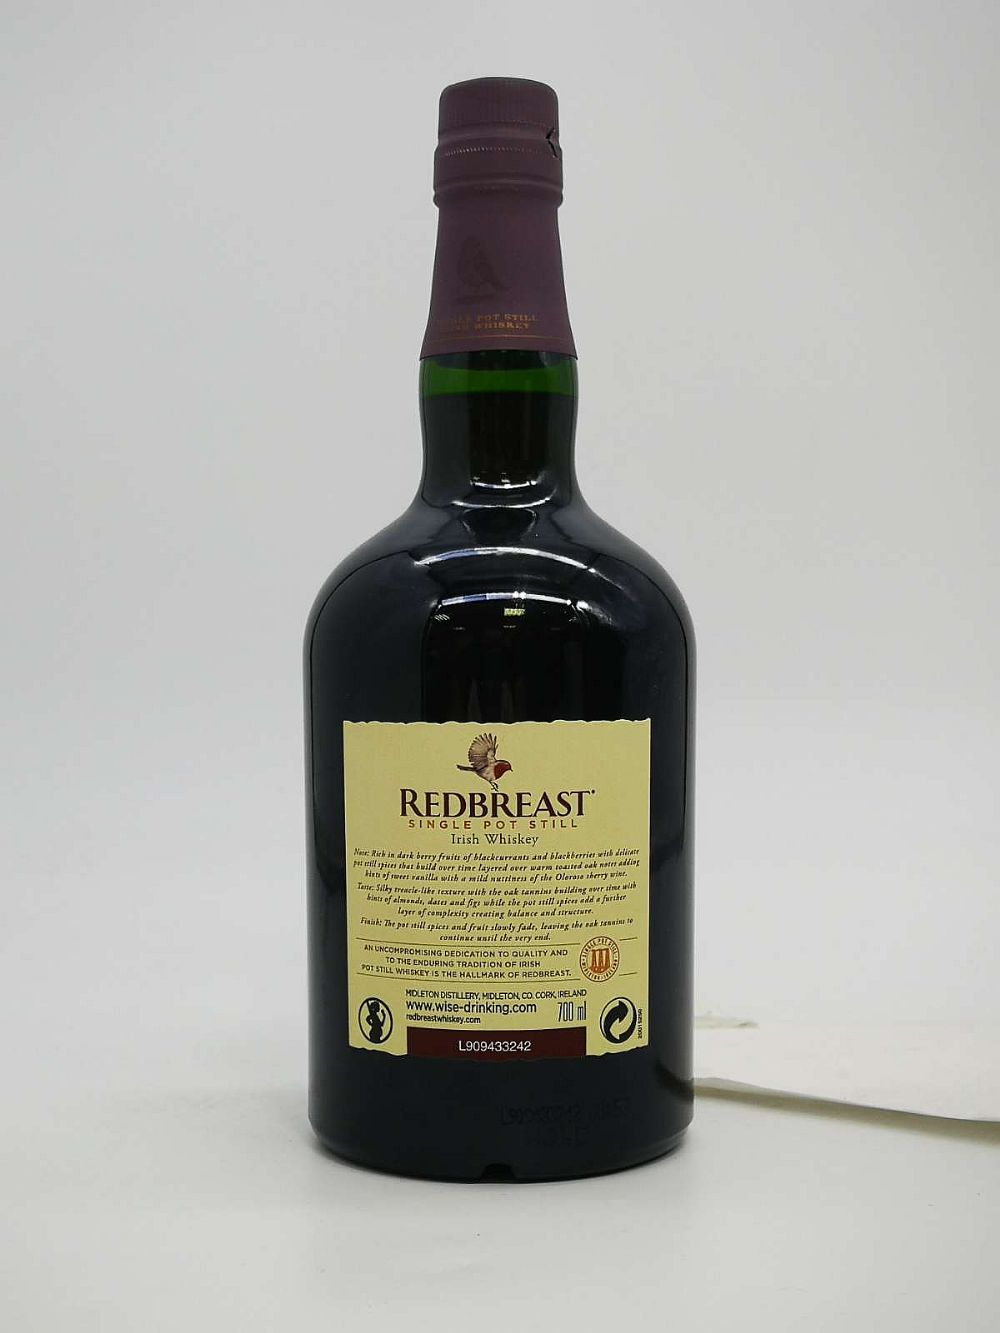 Redbreast 16 year old Single Cask (bottle no. 001), Celtic Whiskey Shop Exclusive, Cask no. 34970 